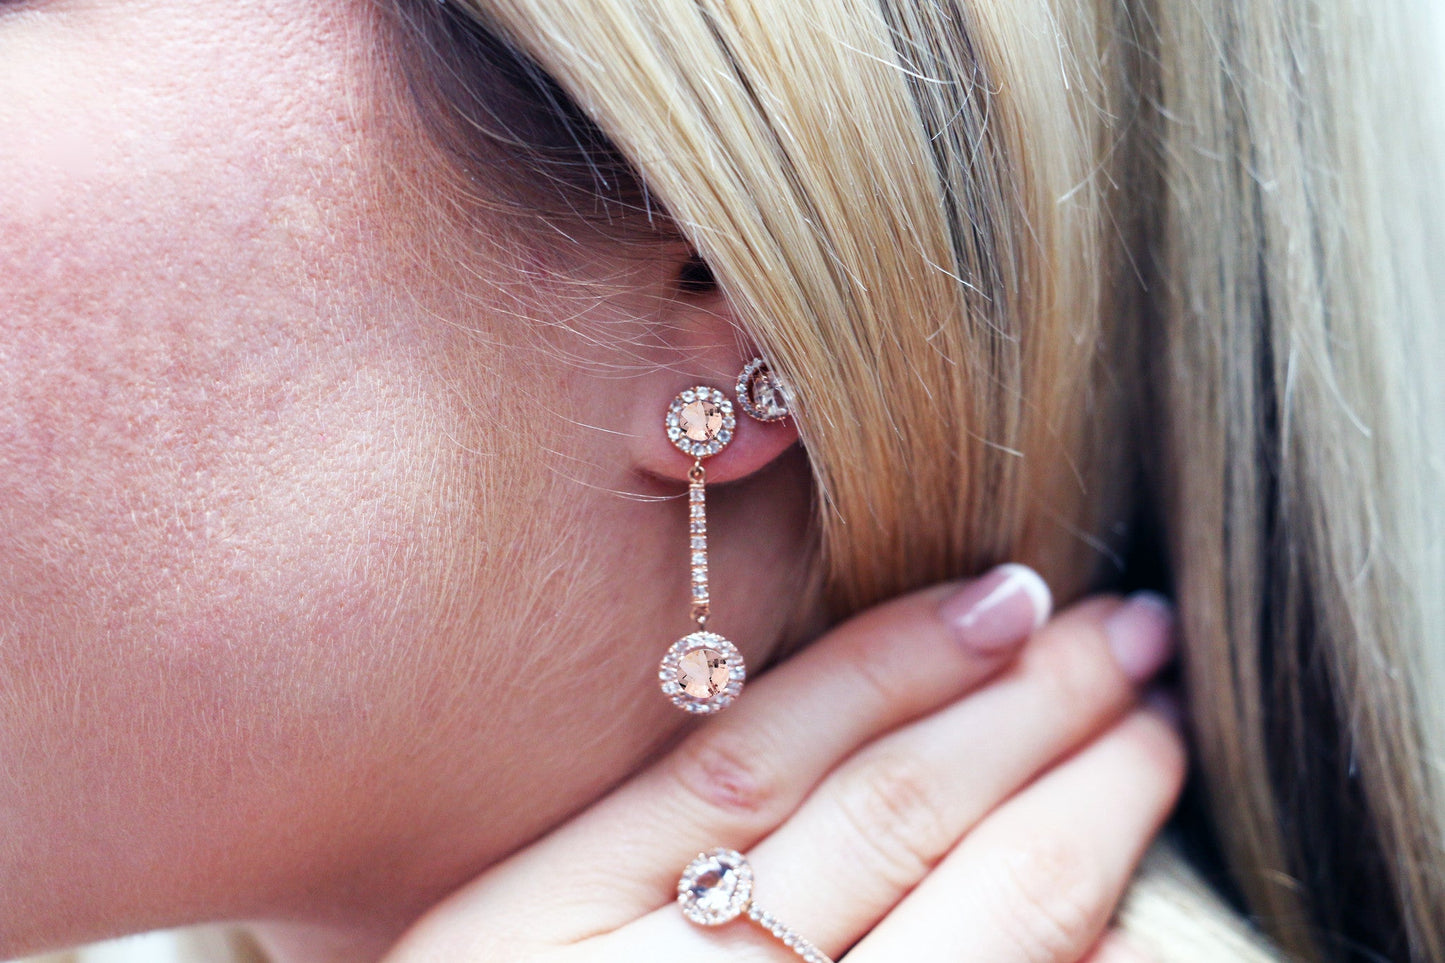 18ct Rose Gold Morganite Drop Earrings | Augustine Jewels | The Venitian Collection